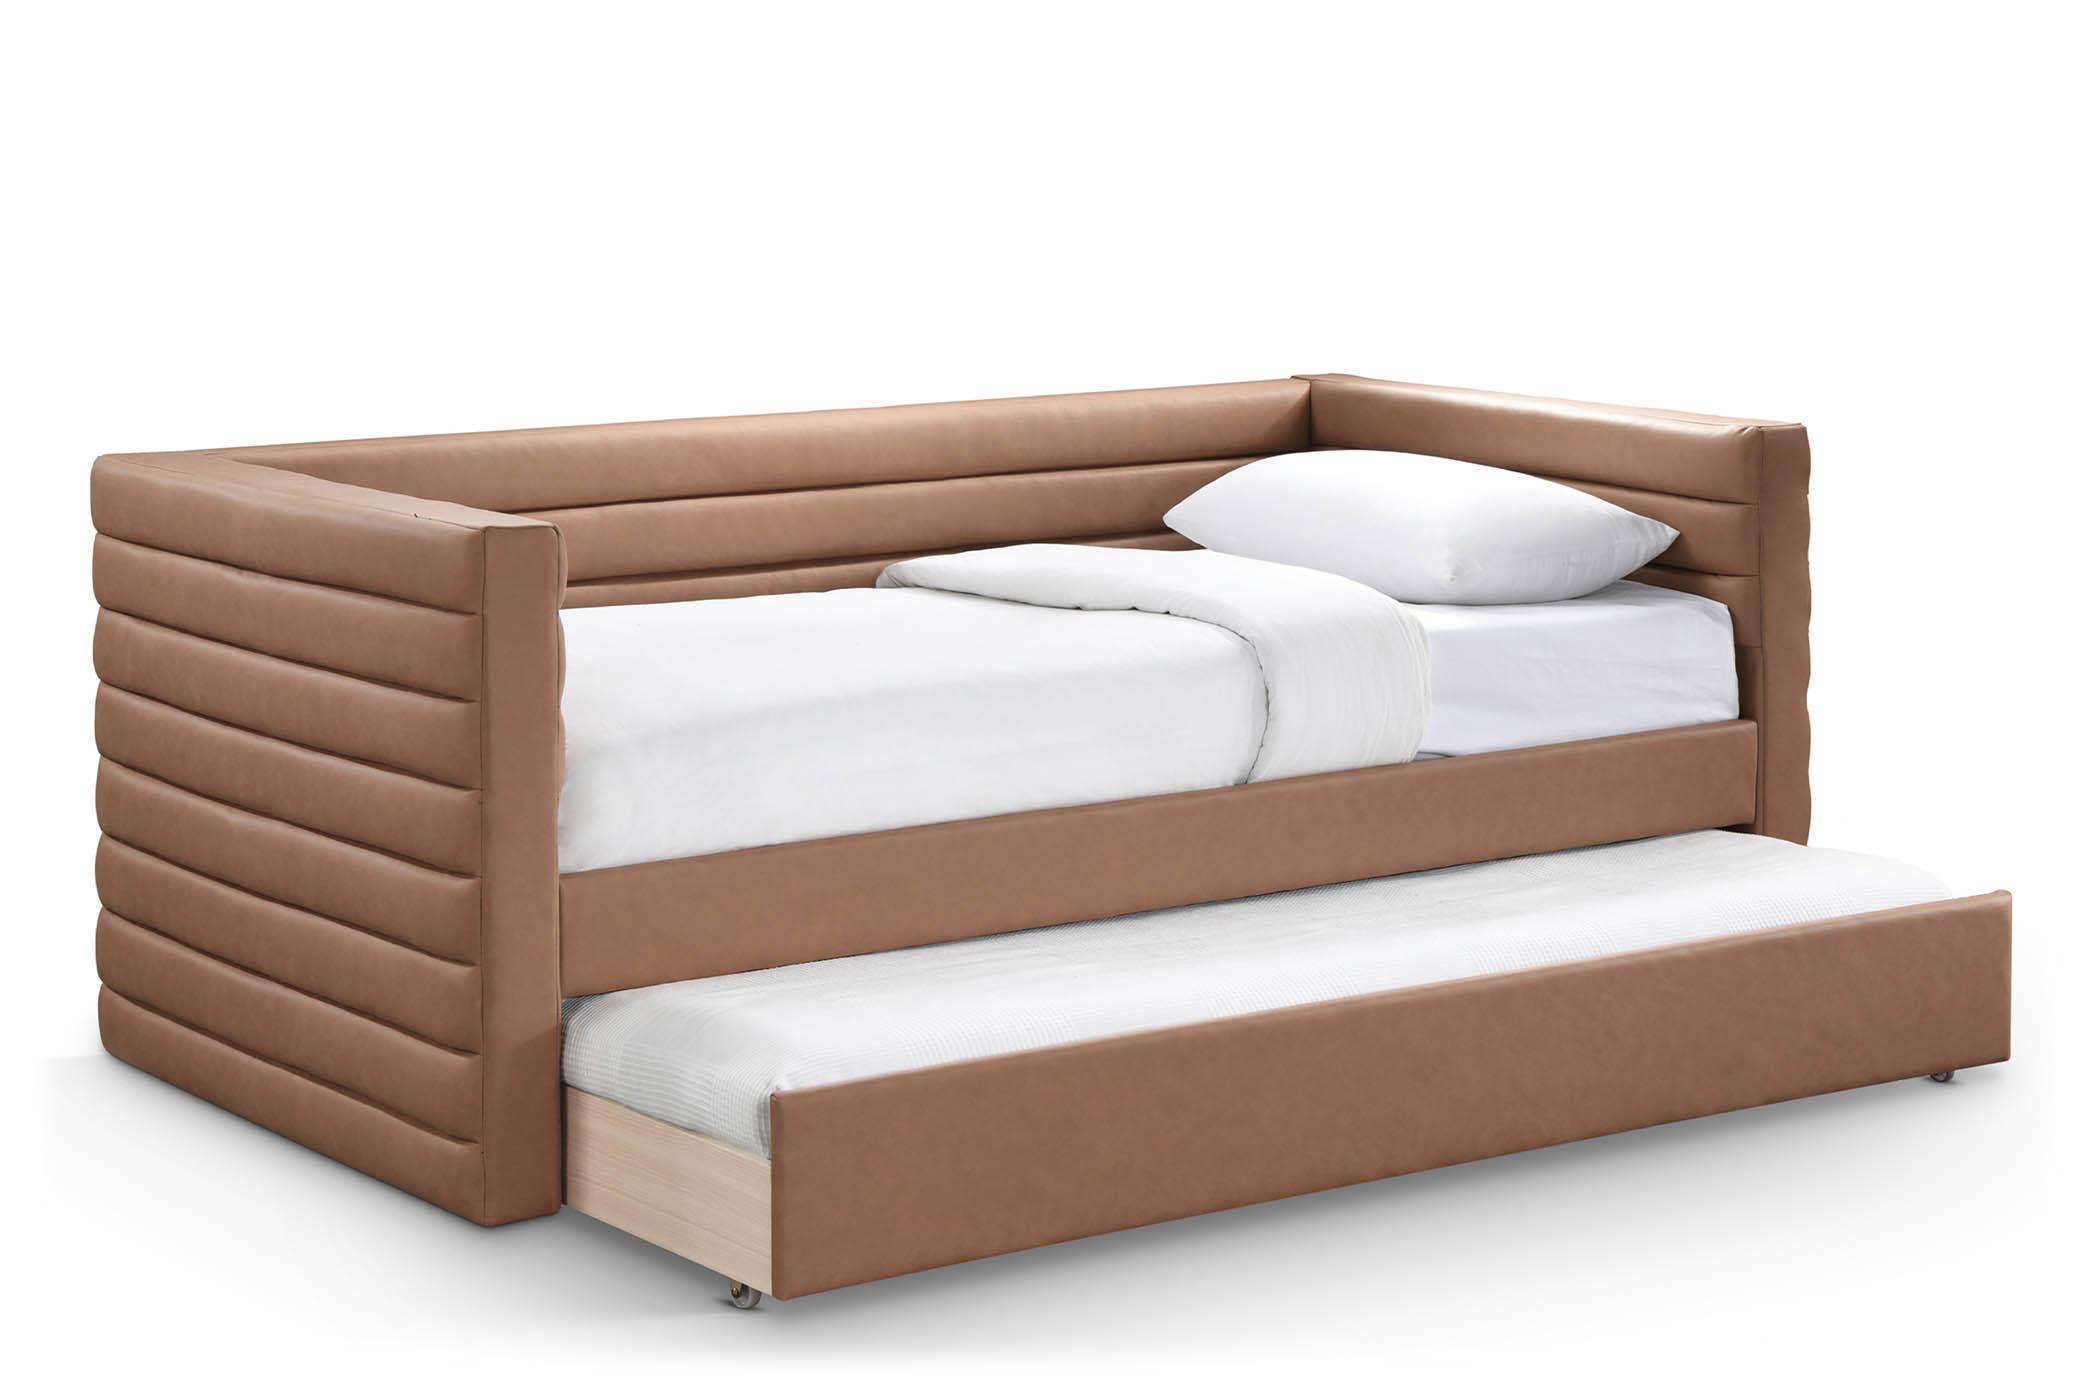 Contemporary, Modern Daybed BeverlyCognac-T BeverlyCognac-T in Cognac Faux Leather